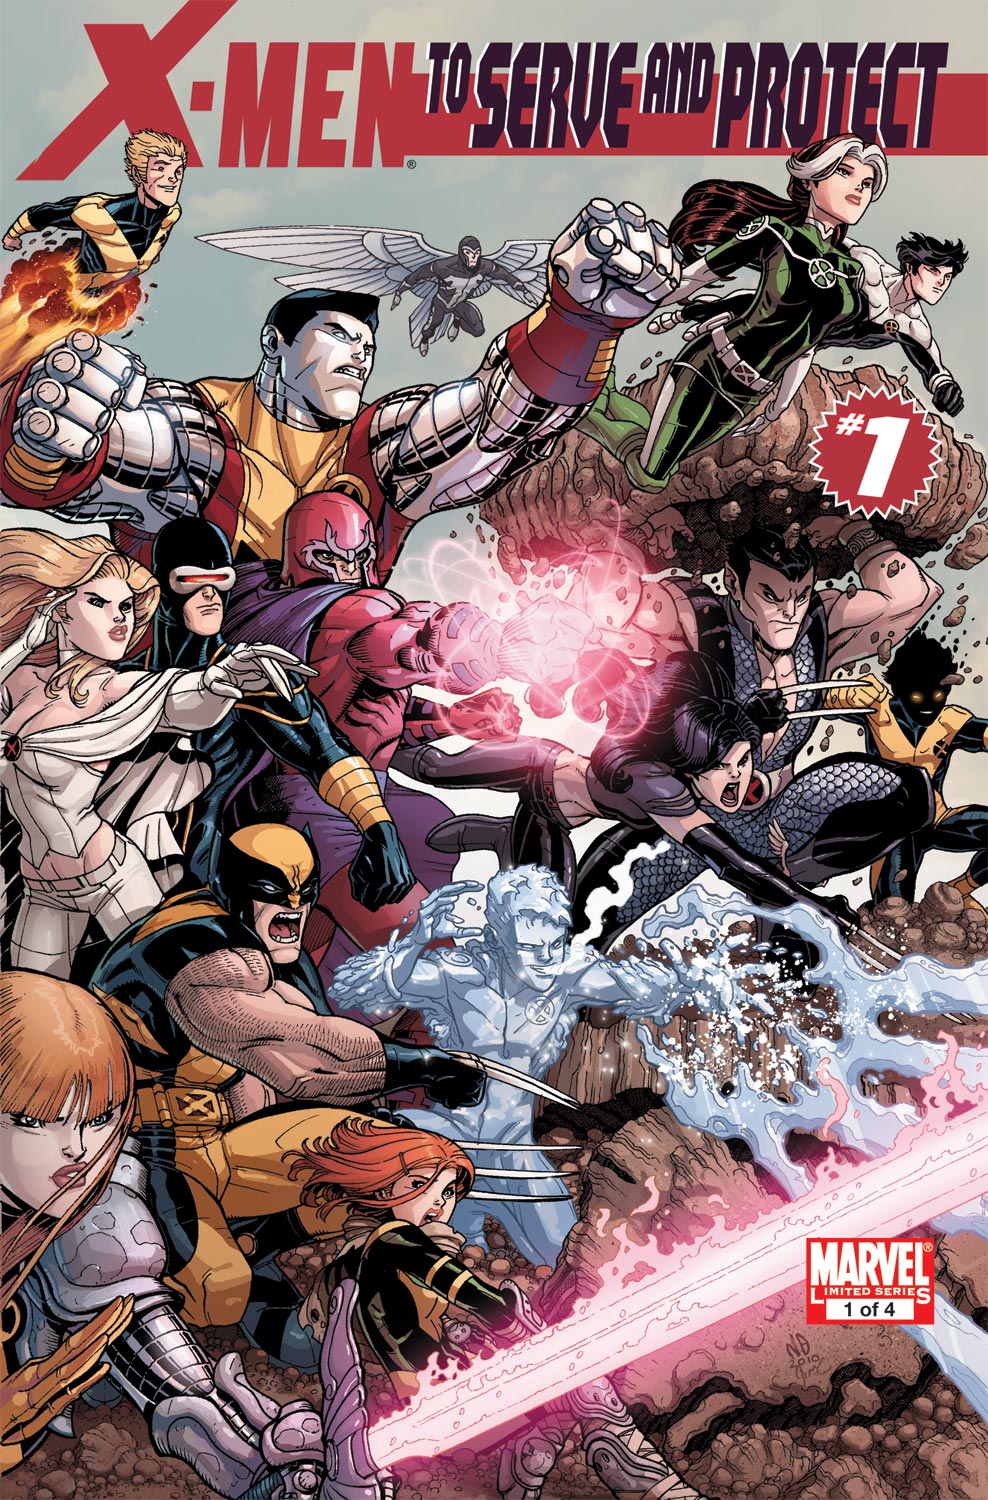 X-Men: To Serve and Protect (2010) #1